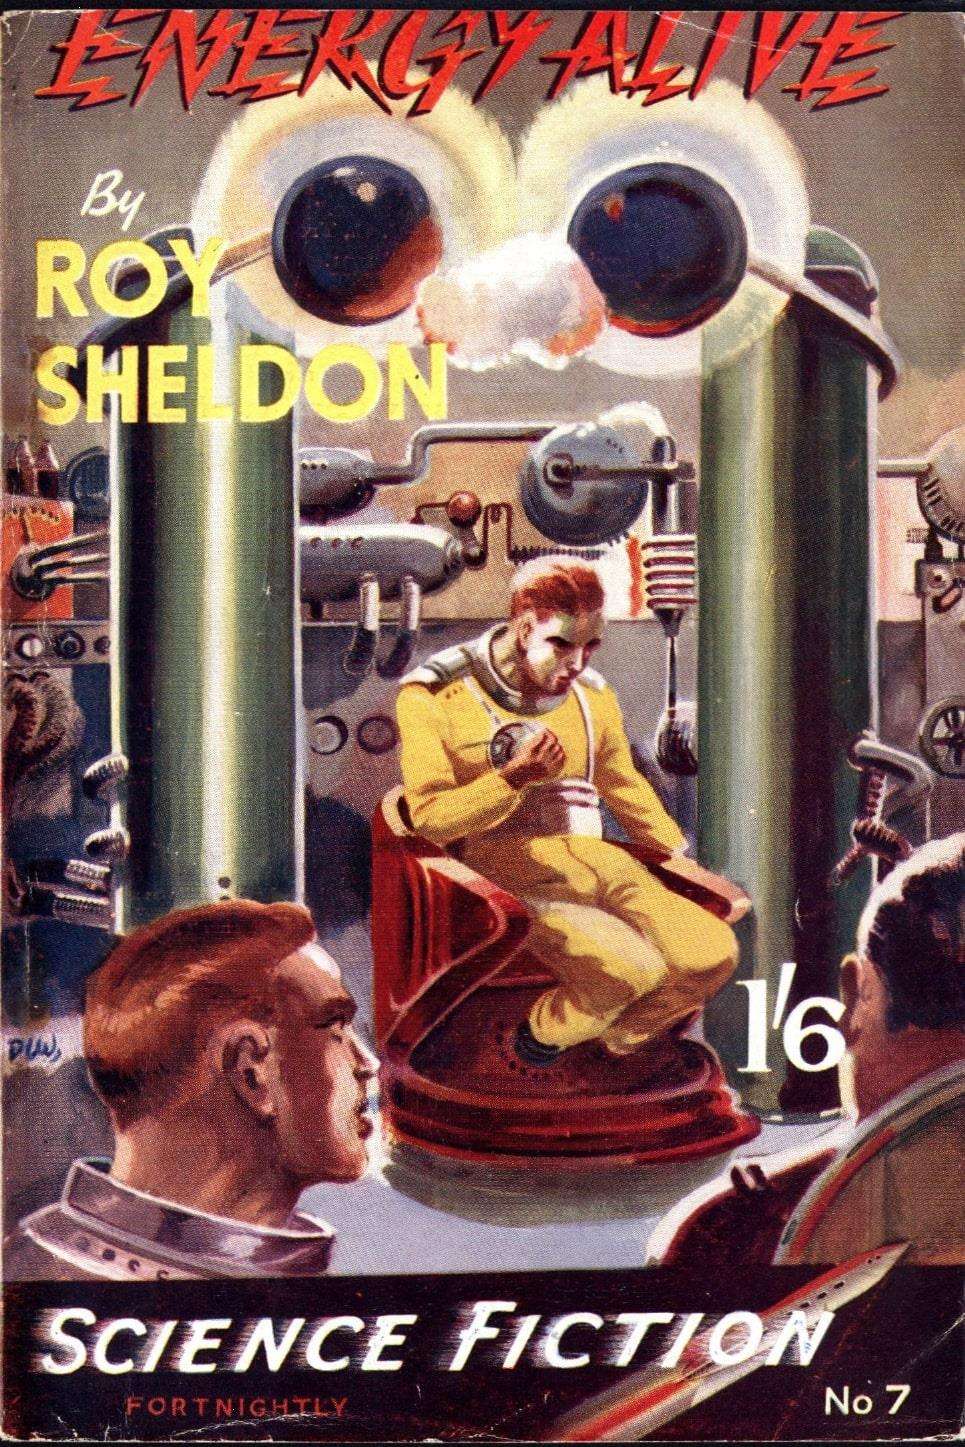 Comic Book Cover For Authentic Science Fiction 7 - Energy Alive - Roy Sheldon